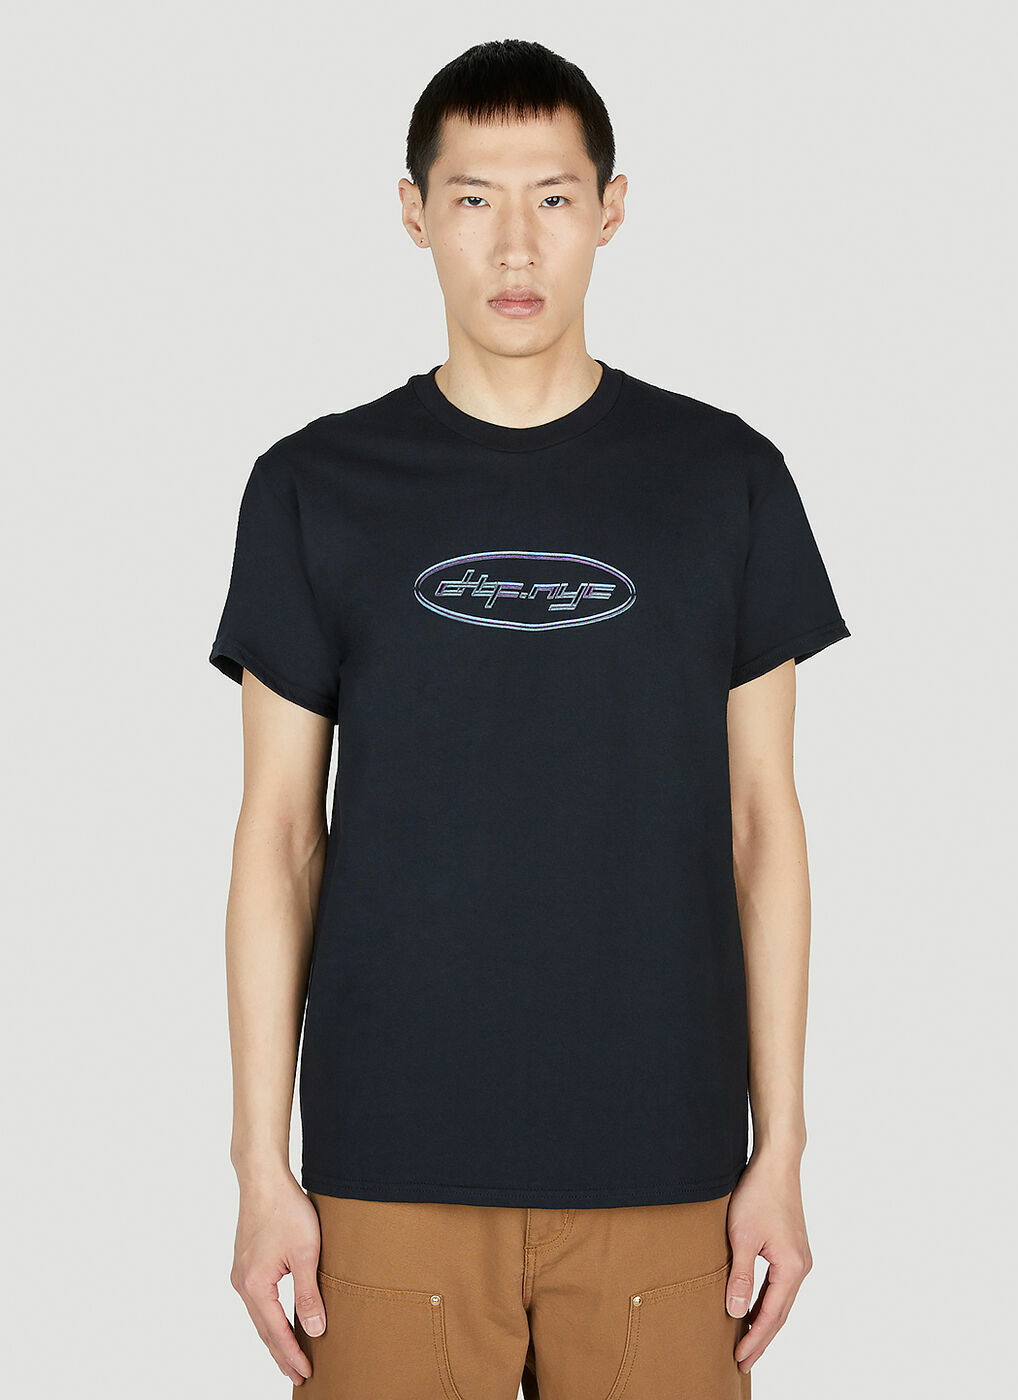 DTF.NYC - Cyber Logo Short-Sleeved T-Shirt in Black